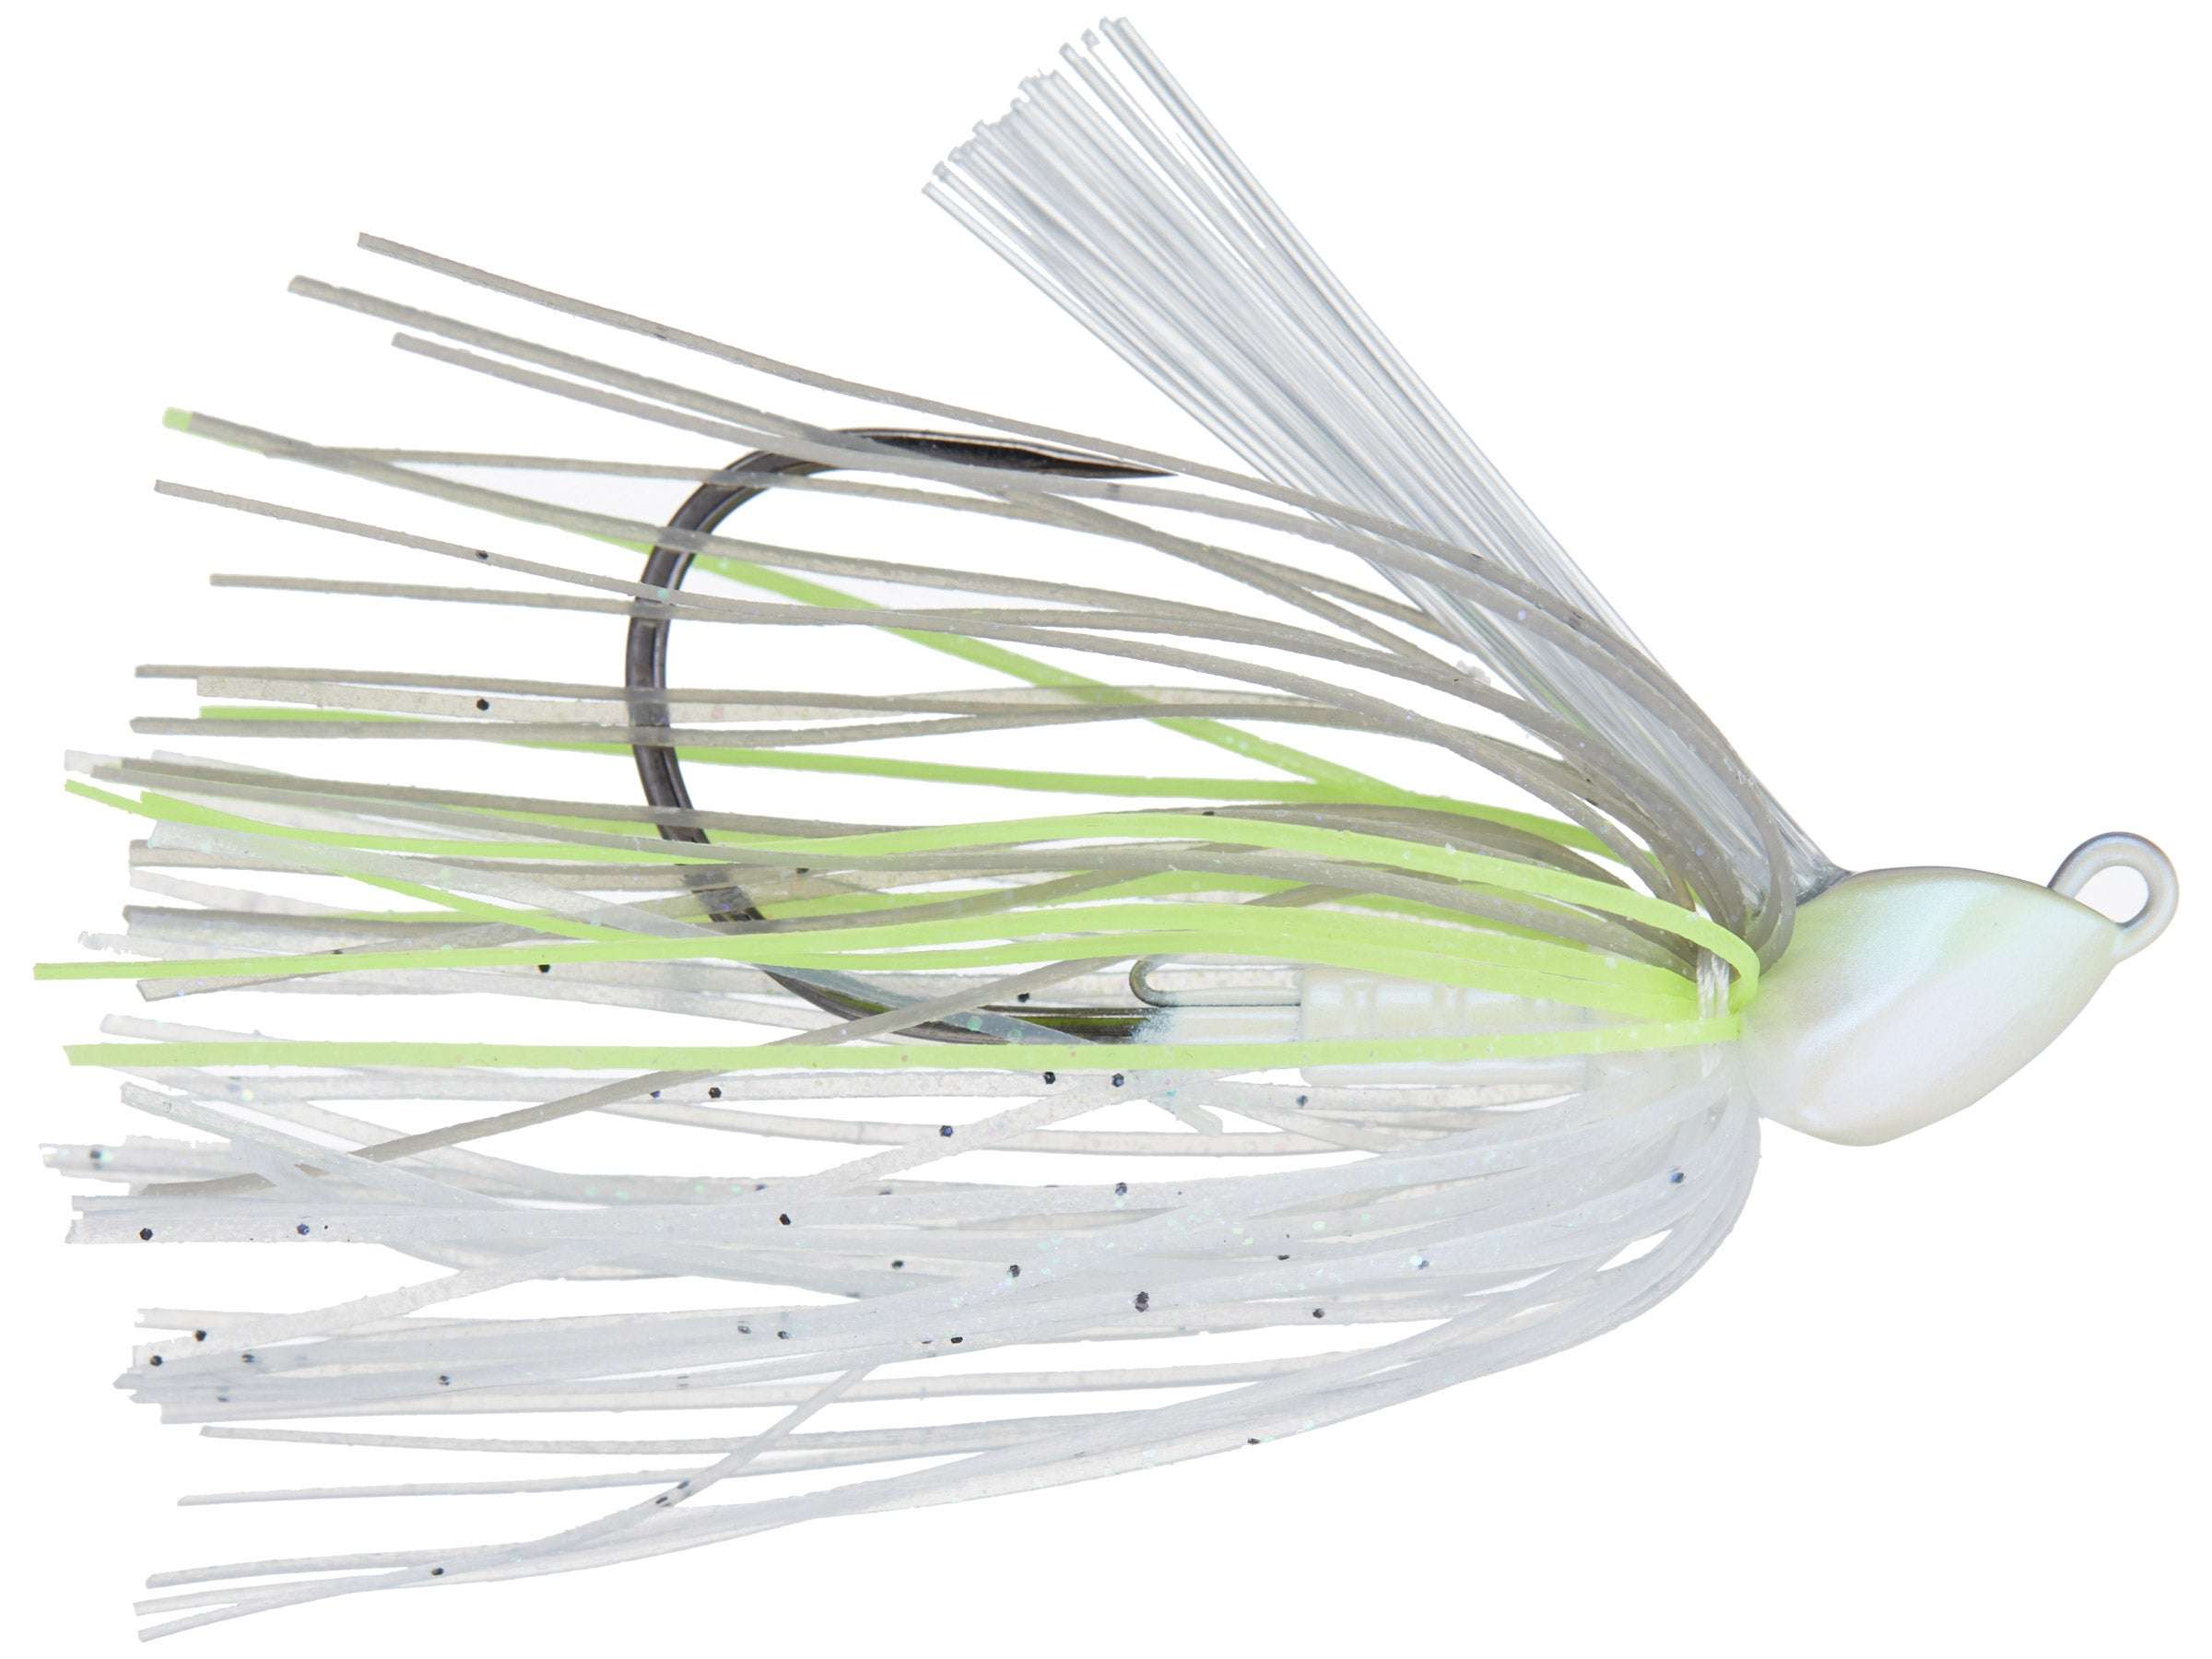 <p><strong>Evergreen Grass Ripper Swim Jig</strong><br> Everyone knows how popular the Z-Man Evergreen ChatterBait Jack Hammer has been for years, but now Evergreen has developed the Grass Ripper Swim Jig that embodies some of the same great features of the Jackhammer but in a swim jig form. The Grass Ripper is built around a custom Gamakatsu 4/0 hook and features a unique head design that comes through cover extremely well. Available in many of the same popular colors as the Jackhammer. <a href=